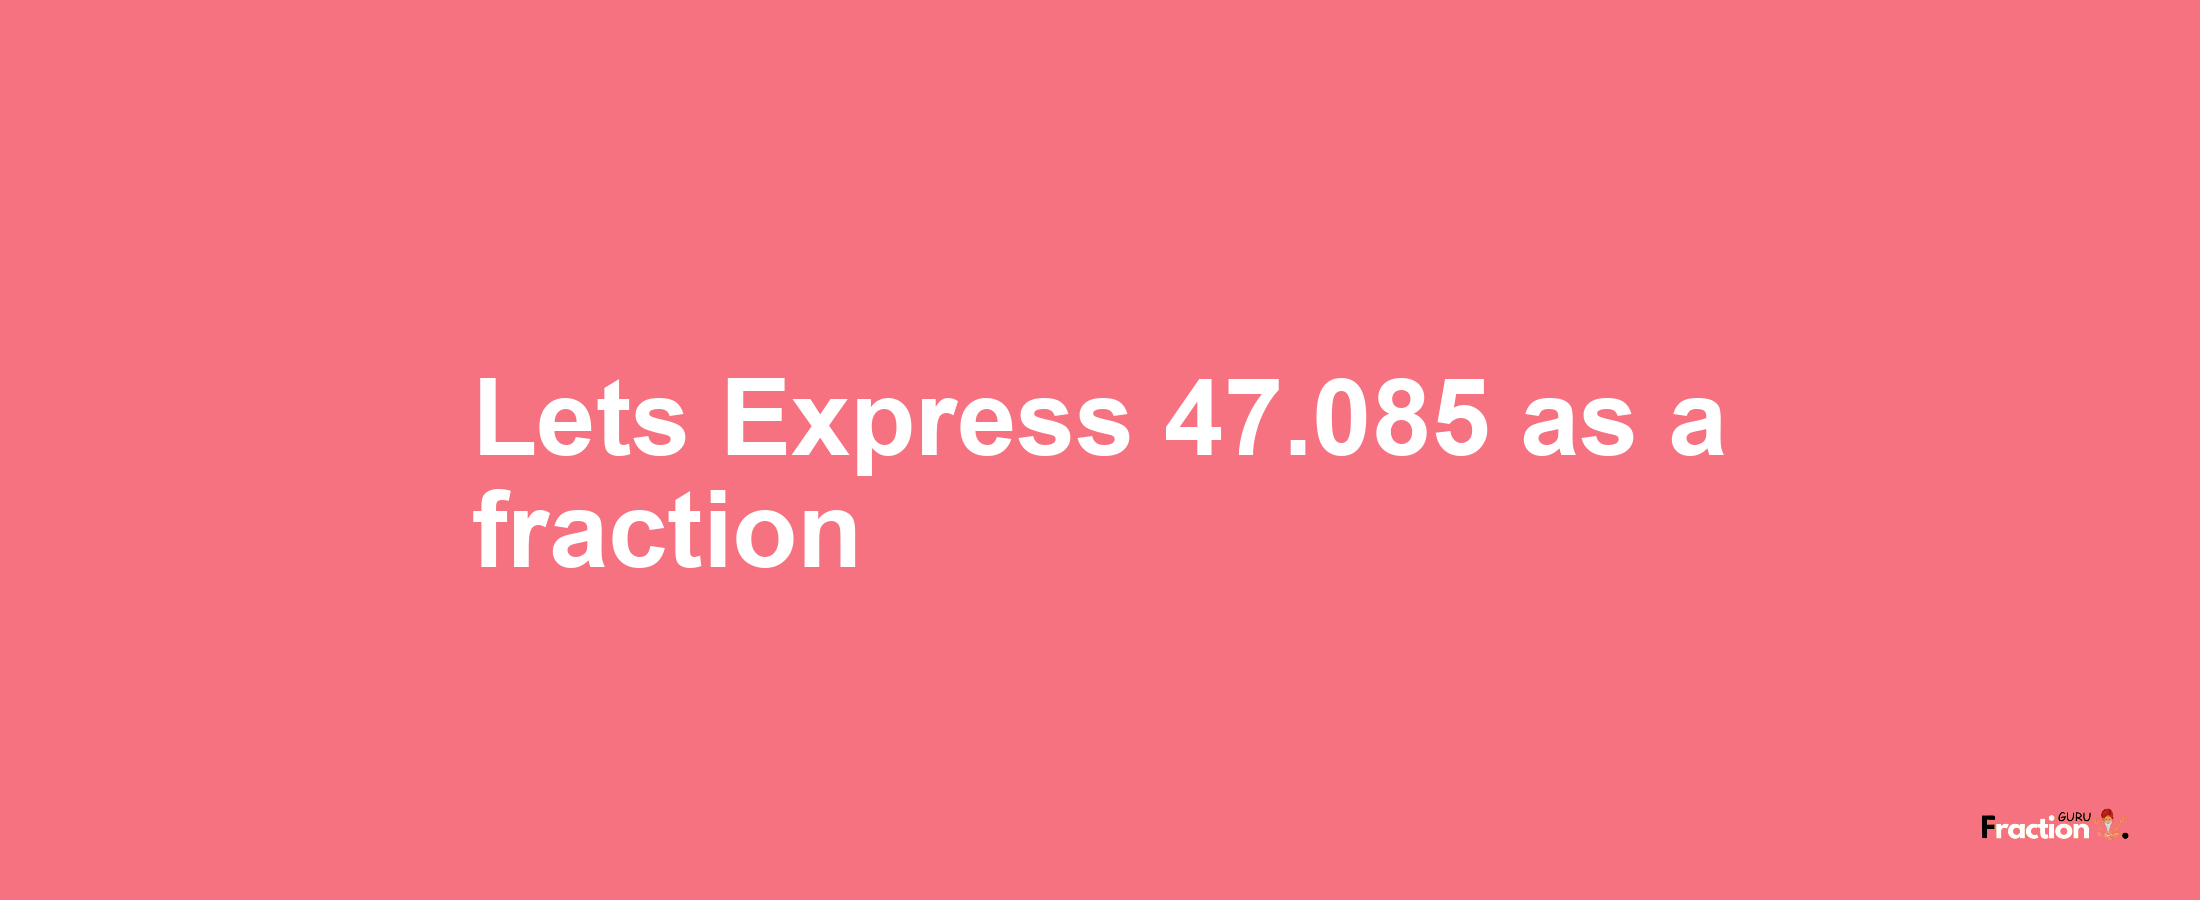 Lets Express 47.085 as afraction